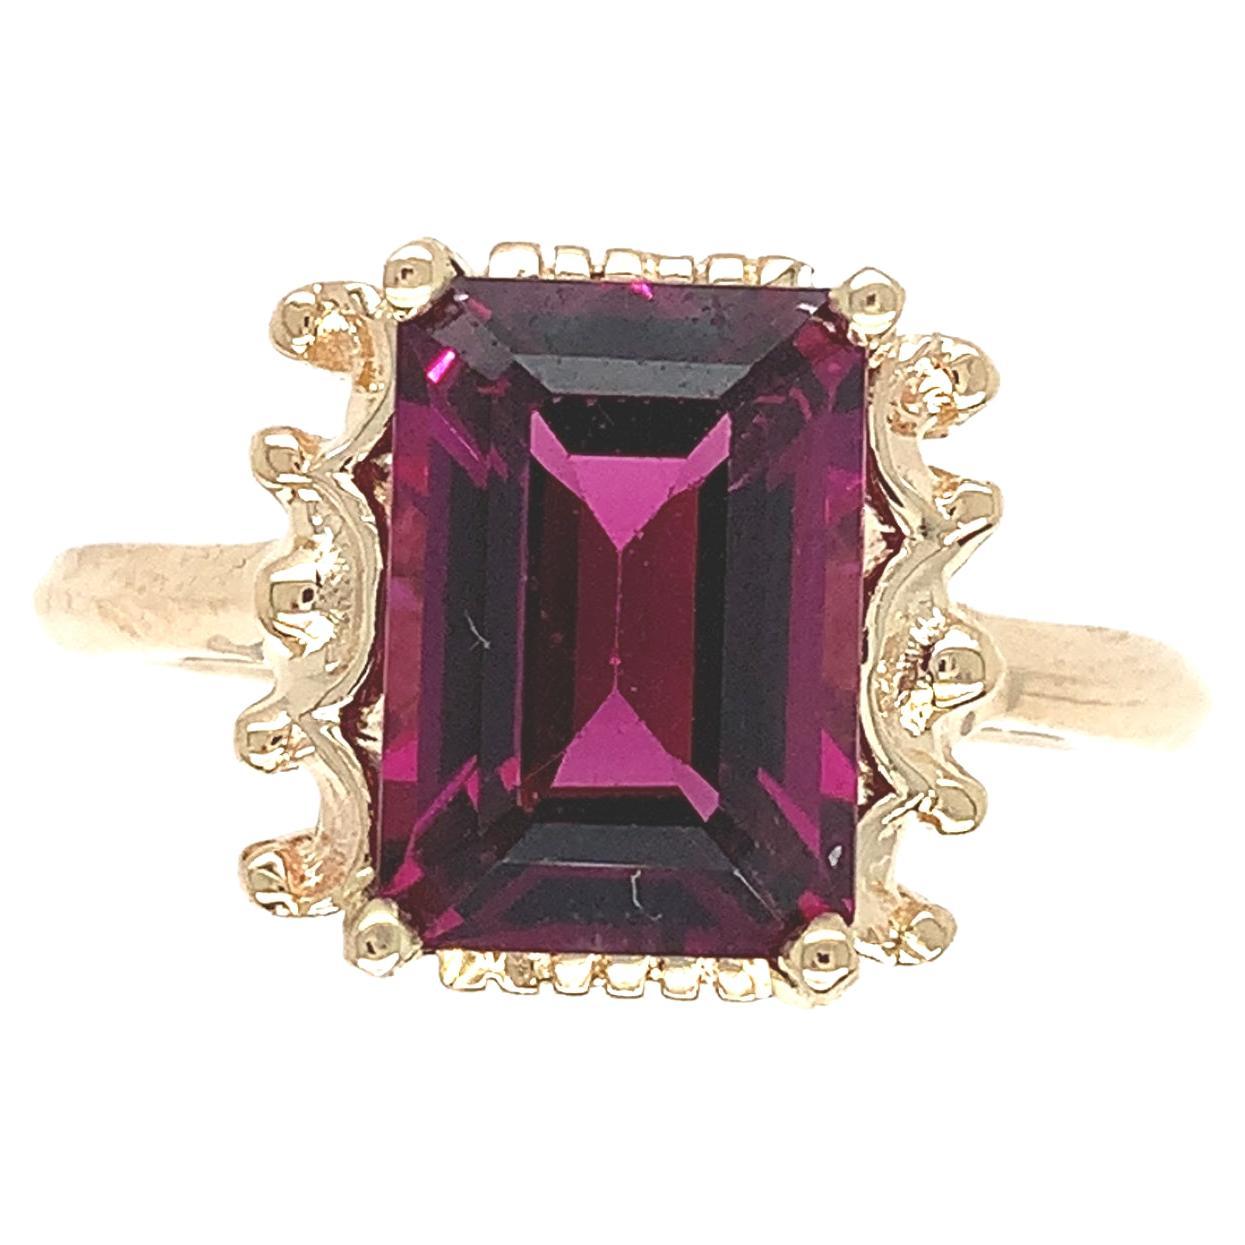 For Sale:  14K Yellow Gold Ring with Emerald Cut 3.51 carat Rhodolite Garnet